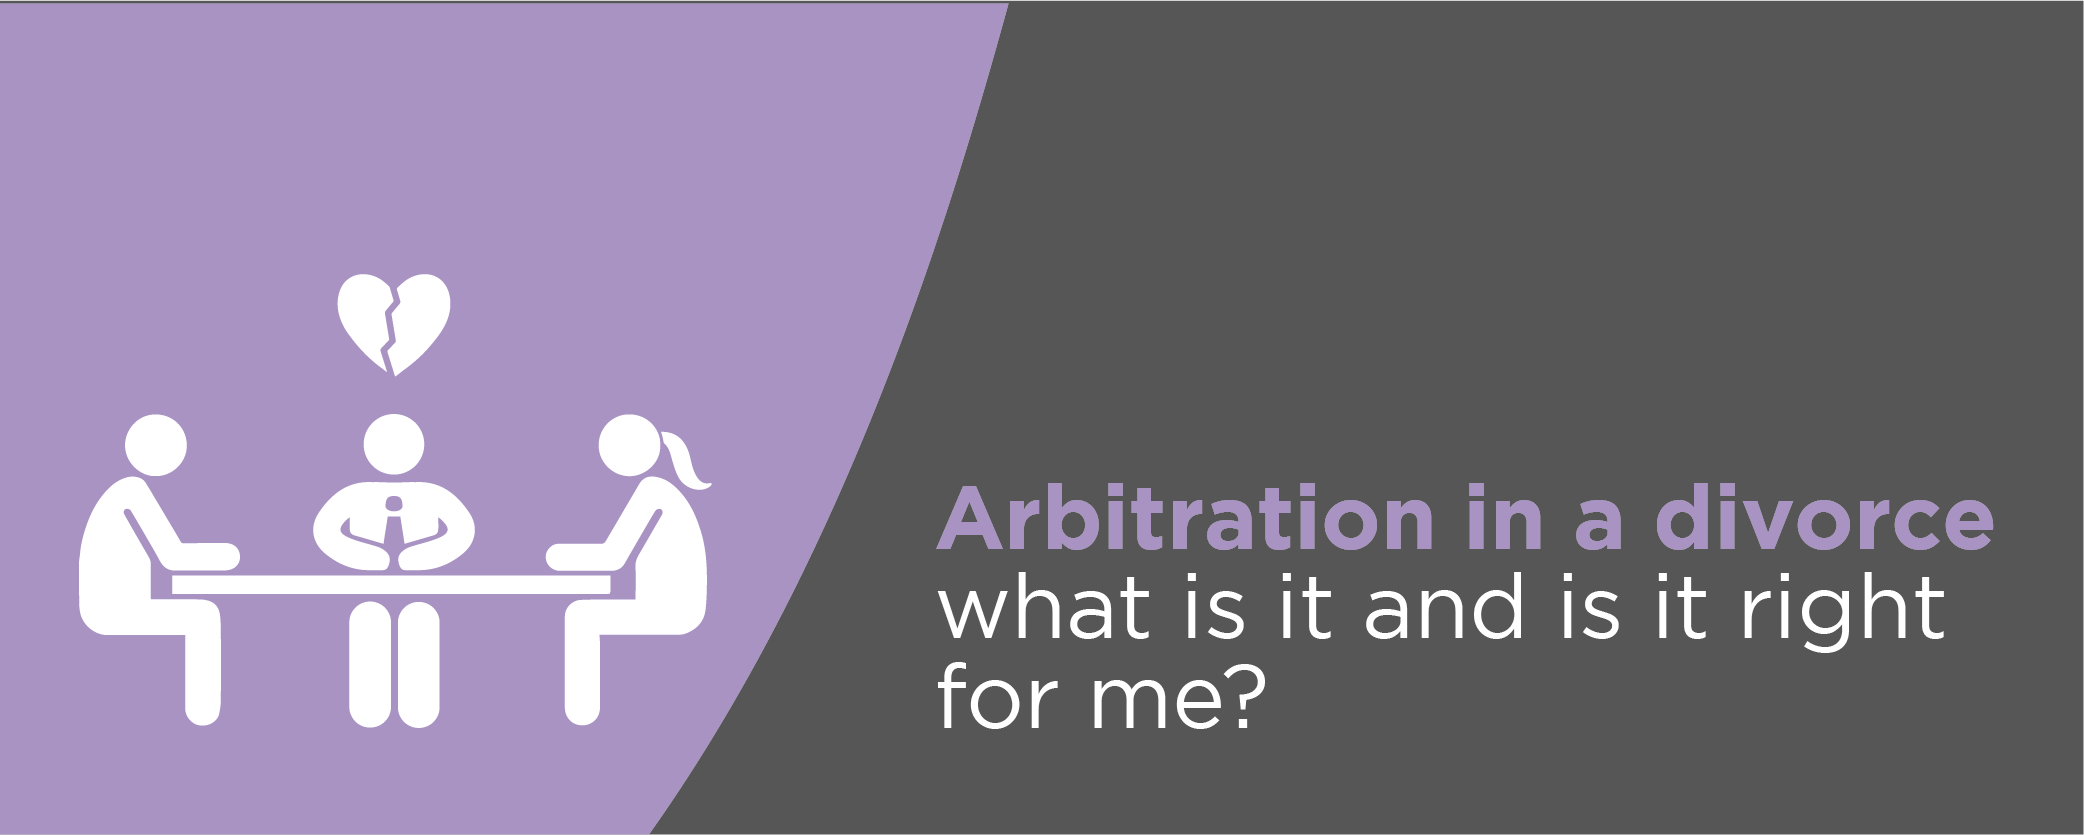 Arbitration in a divorce: what is it and is it right for me?